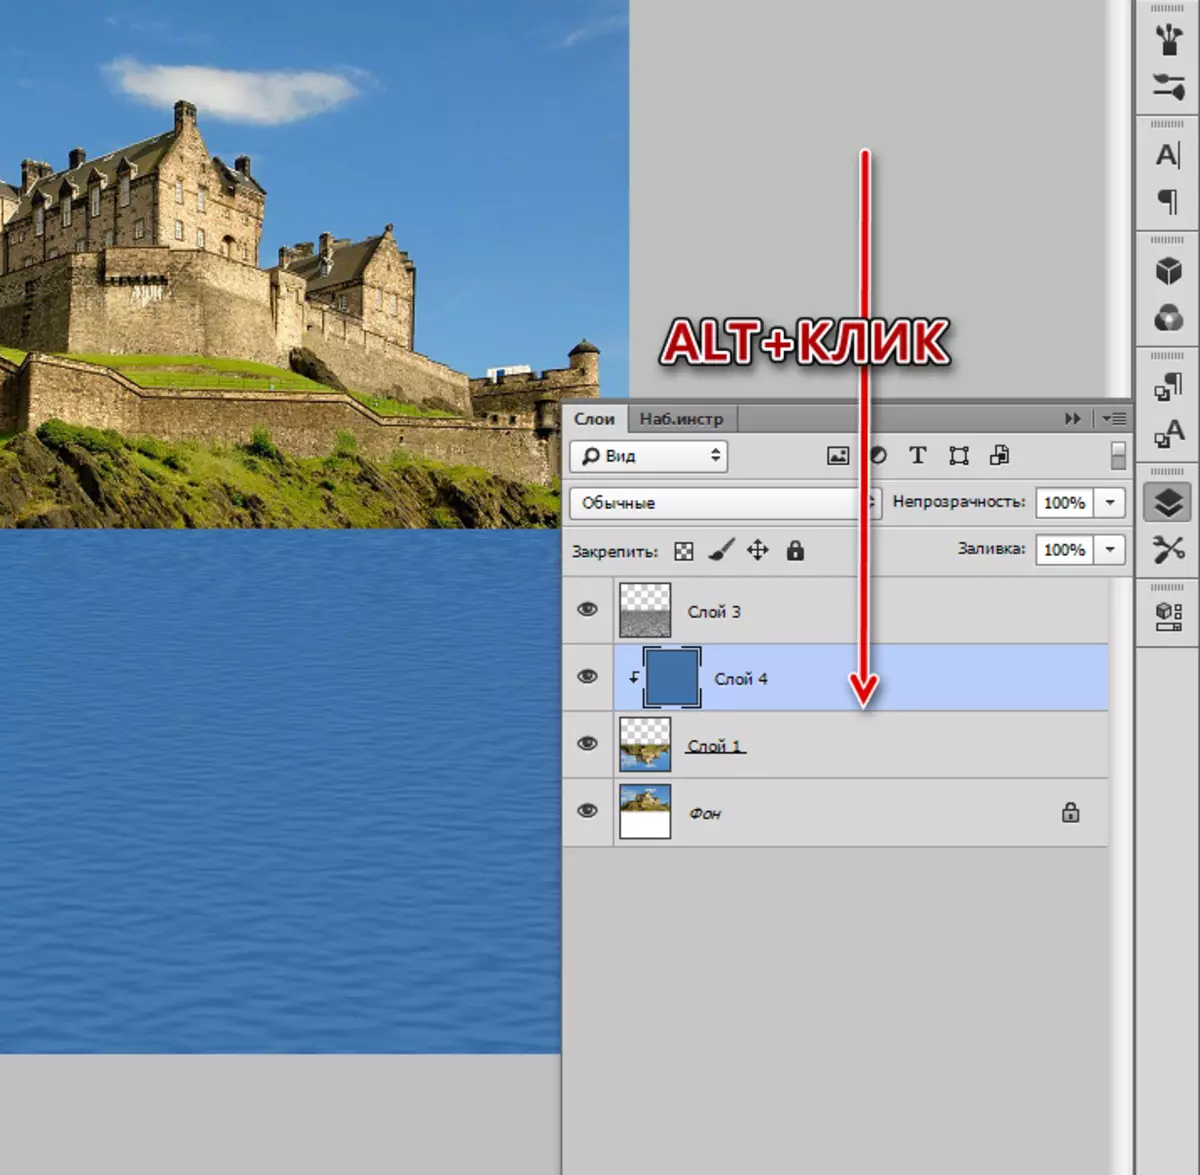 Creating a clipping mask